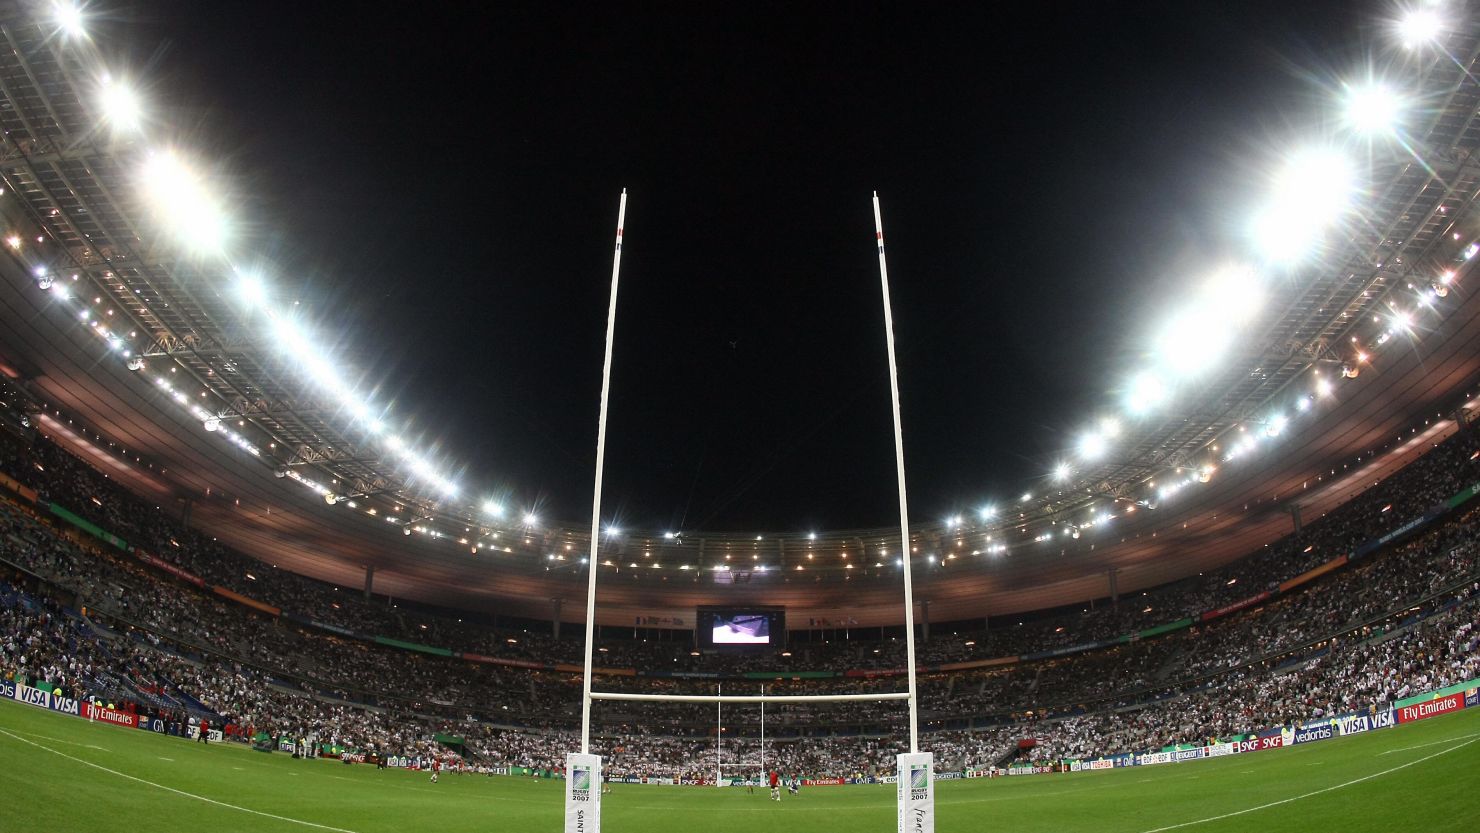 France is hosting the 2023 Rugby World Cup a year before the Summer Olympics are held in Paris